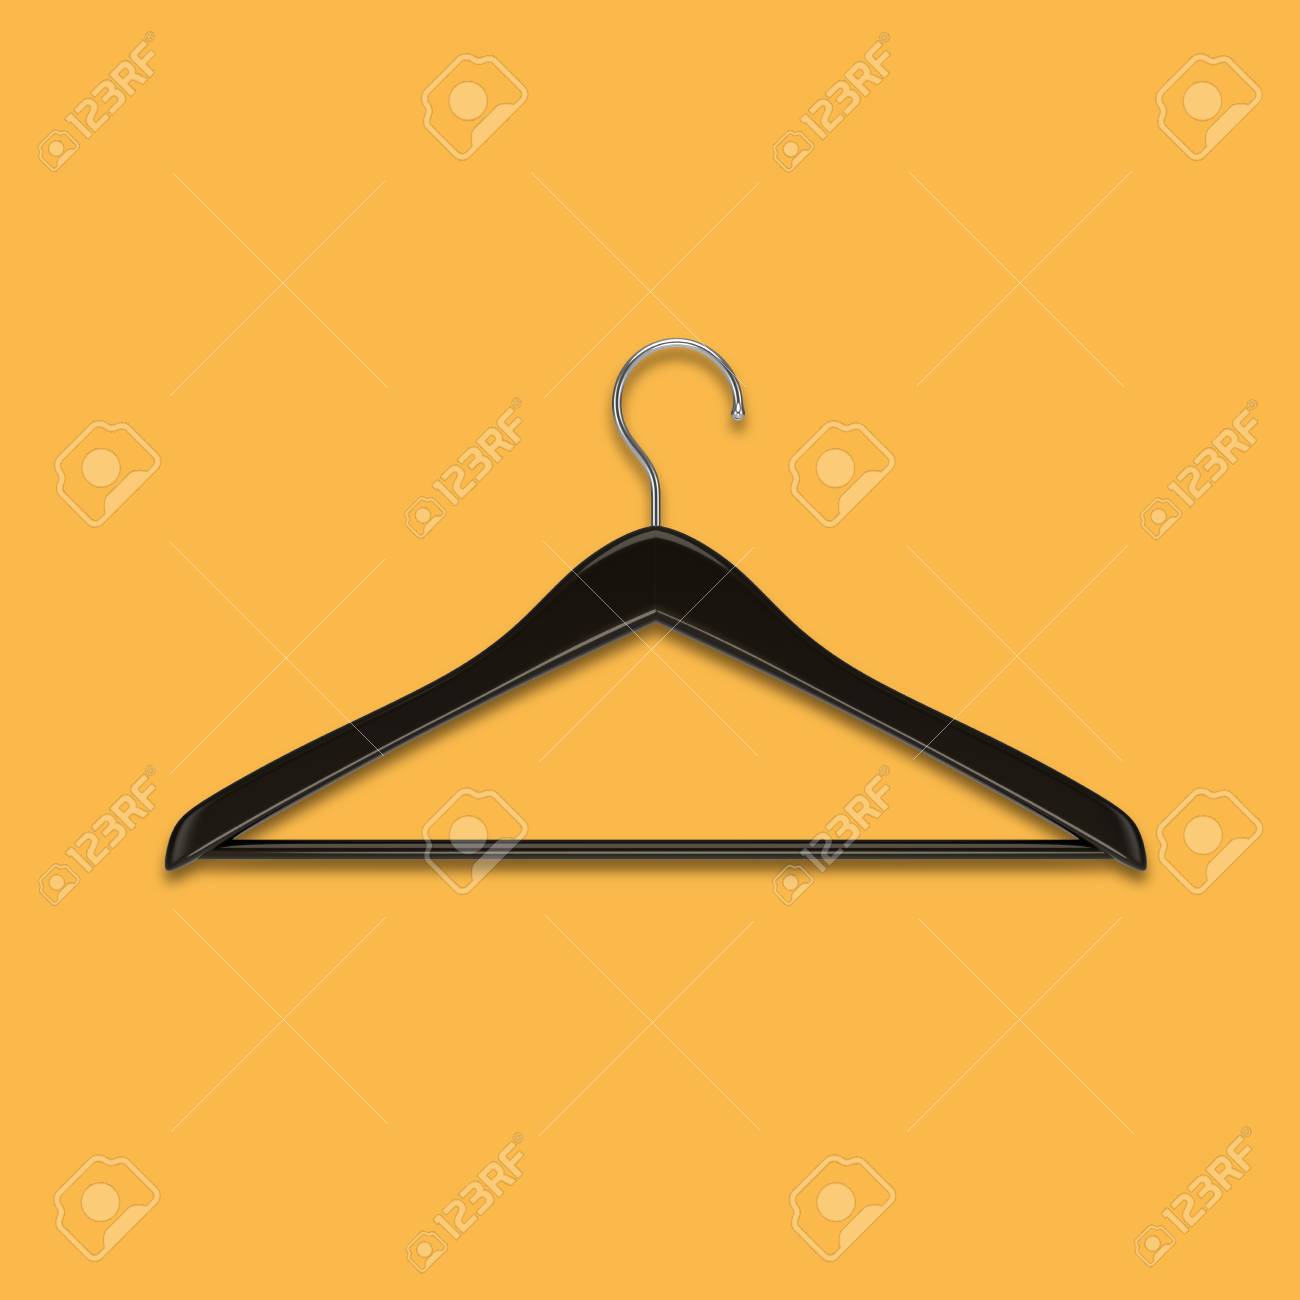 Boutique Shop Black Clothes Hanger Isolated On Yellow Background